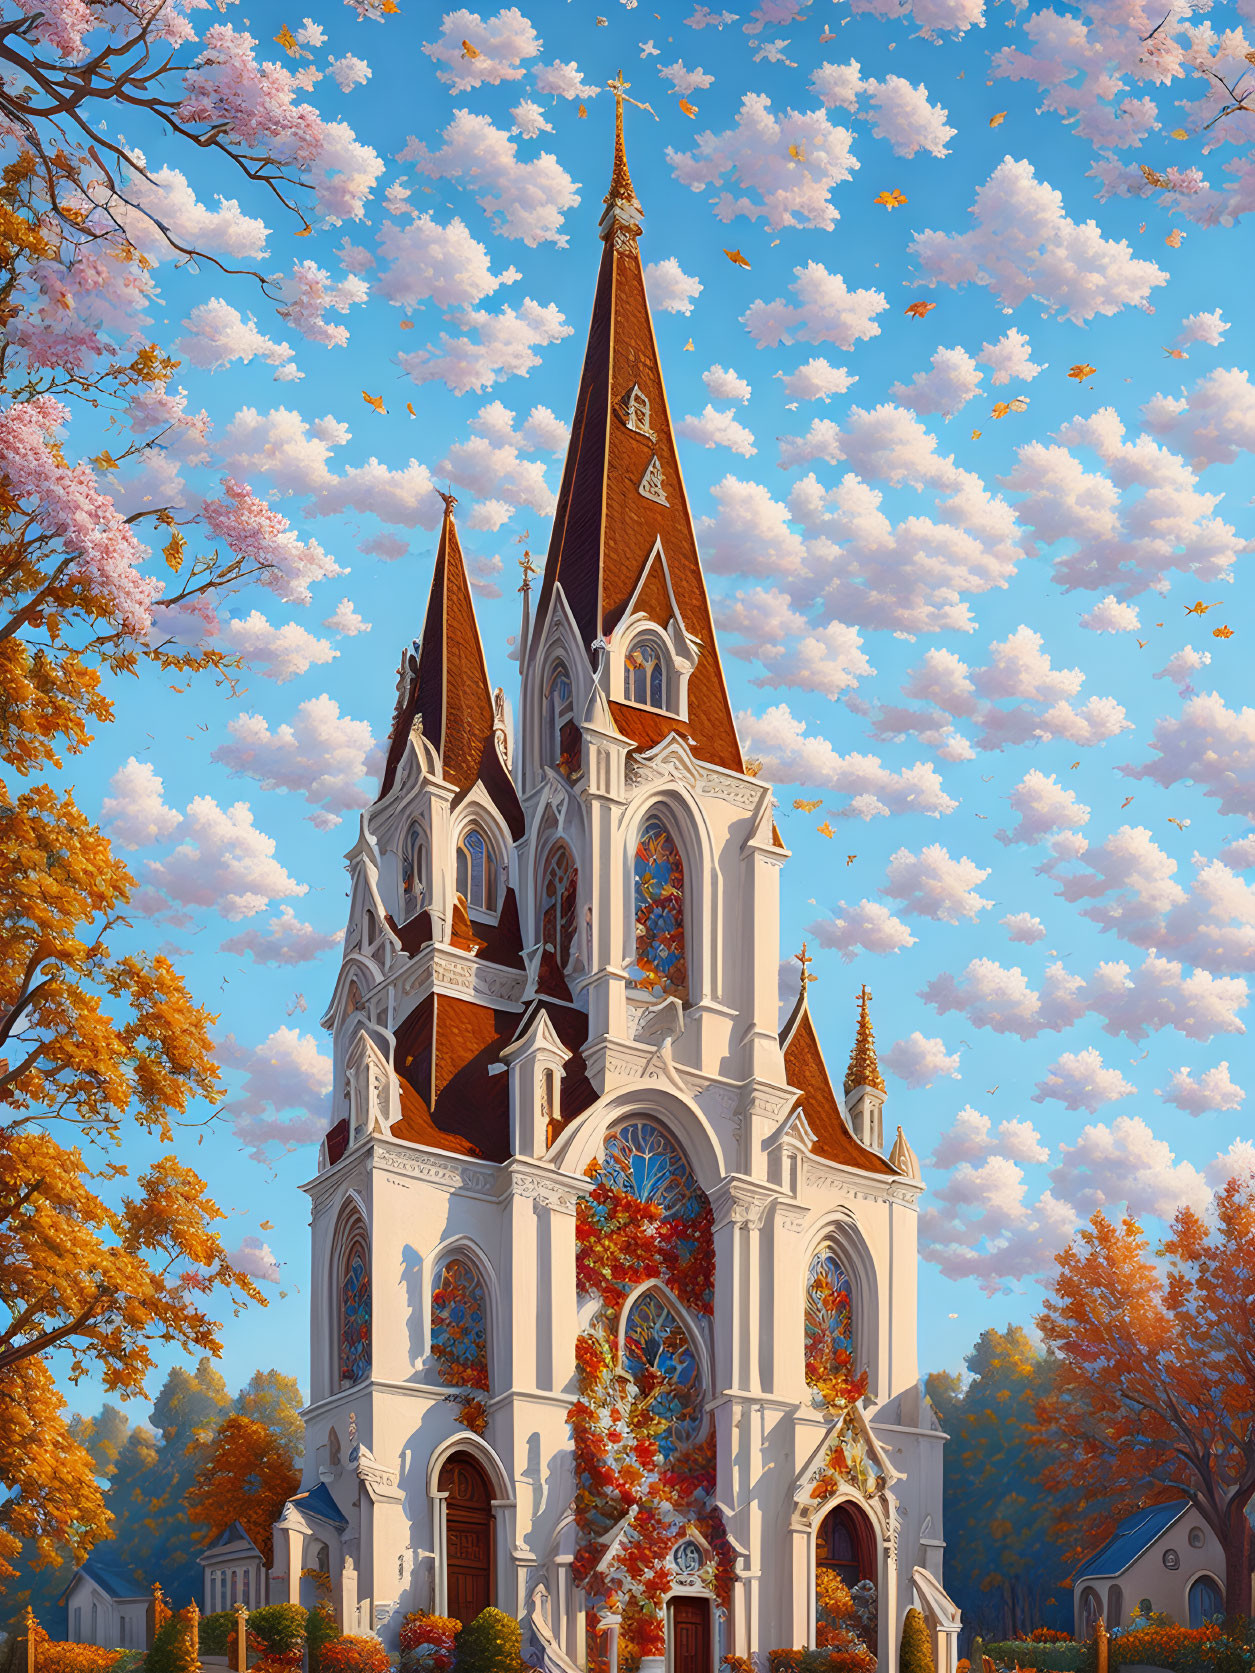 Gothic-style church with twin spires in autumn scenery